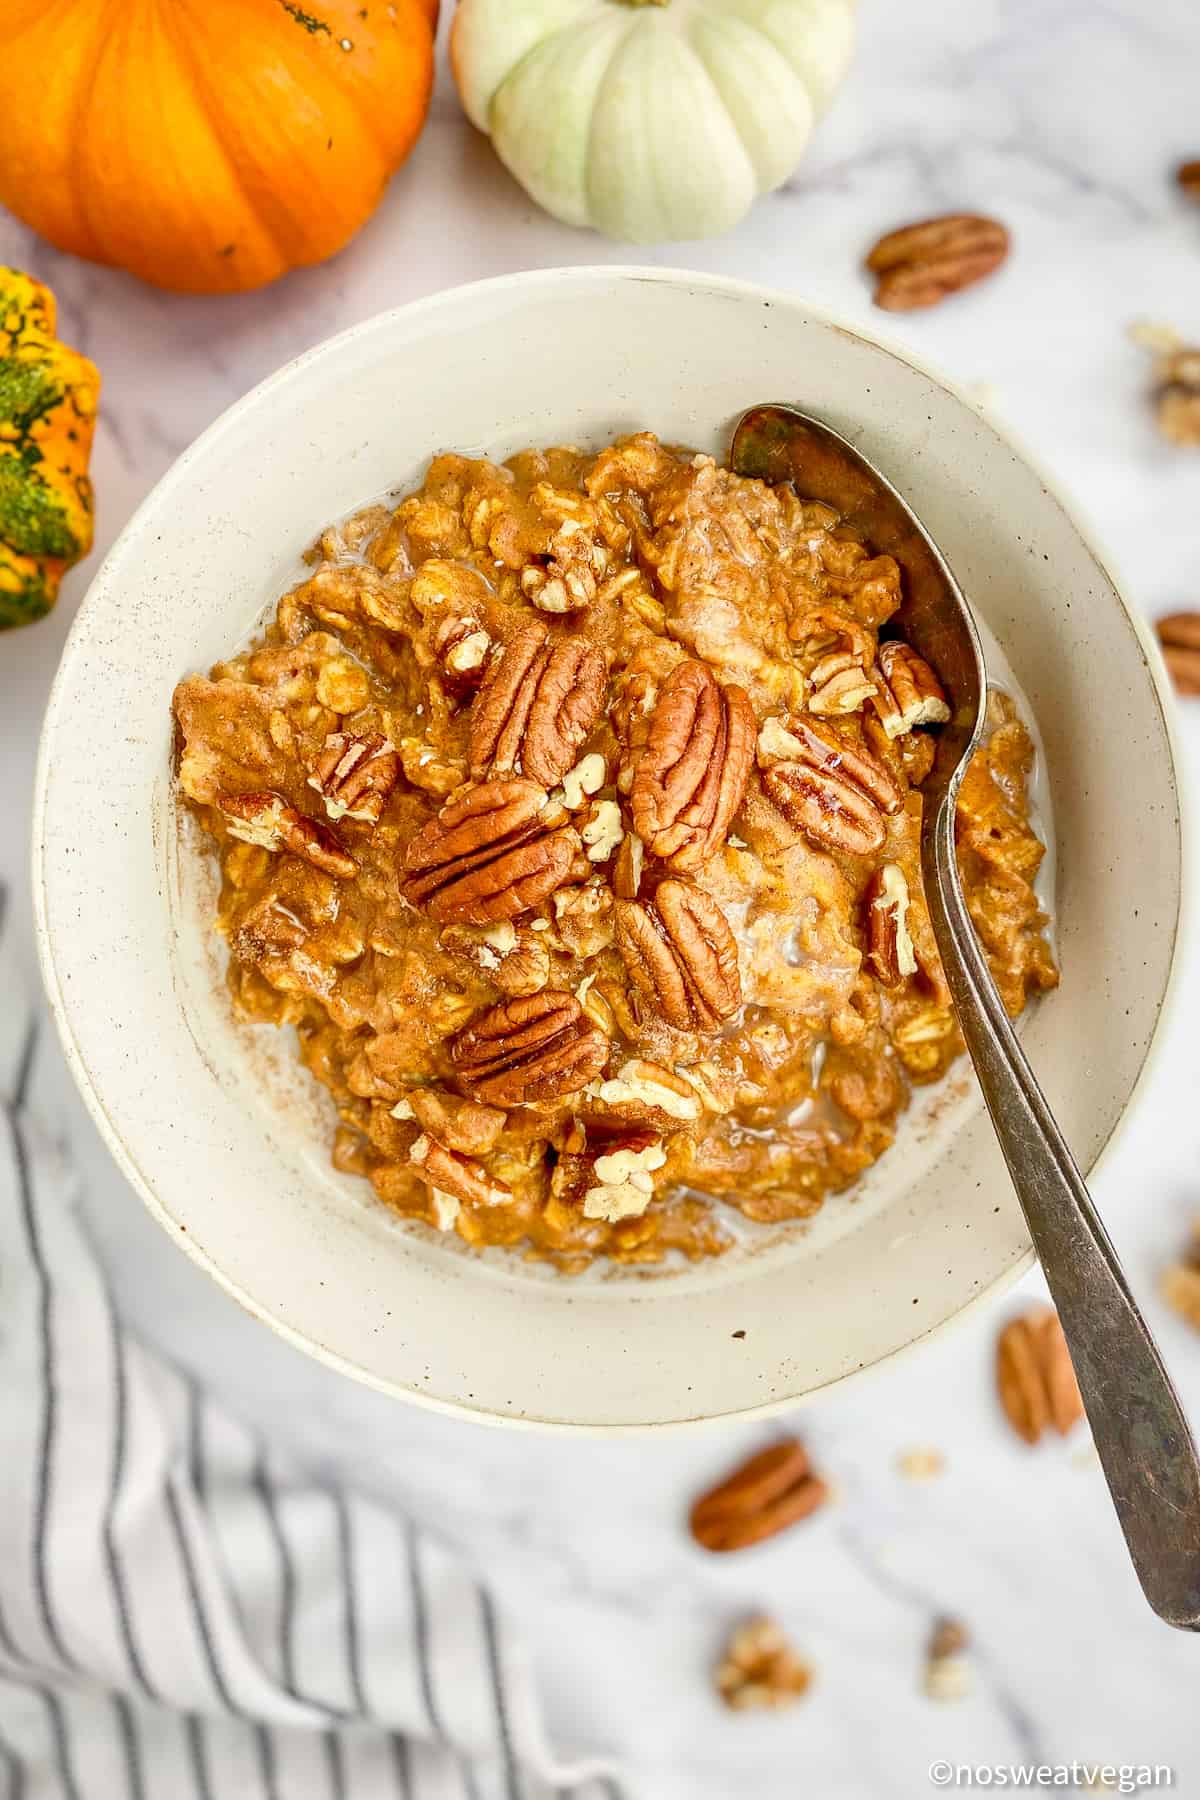 Pumpkin oatmeal in a bowl with a spoon.